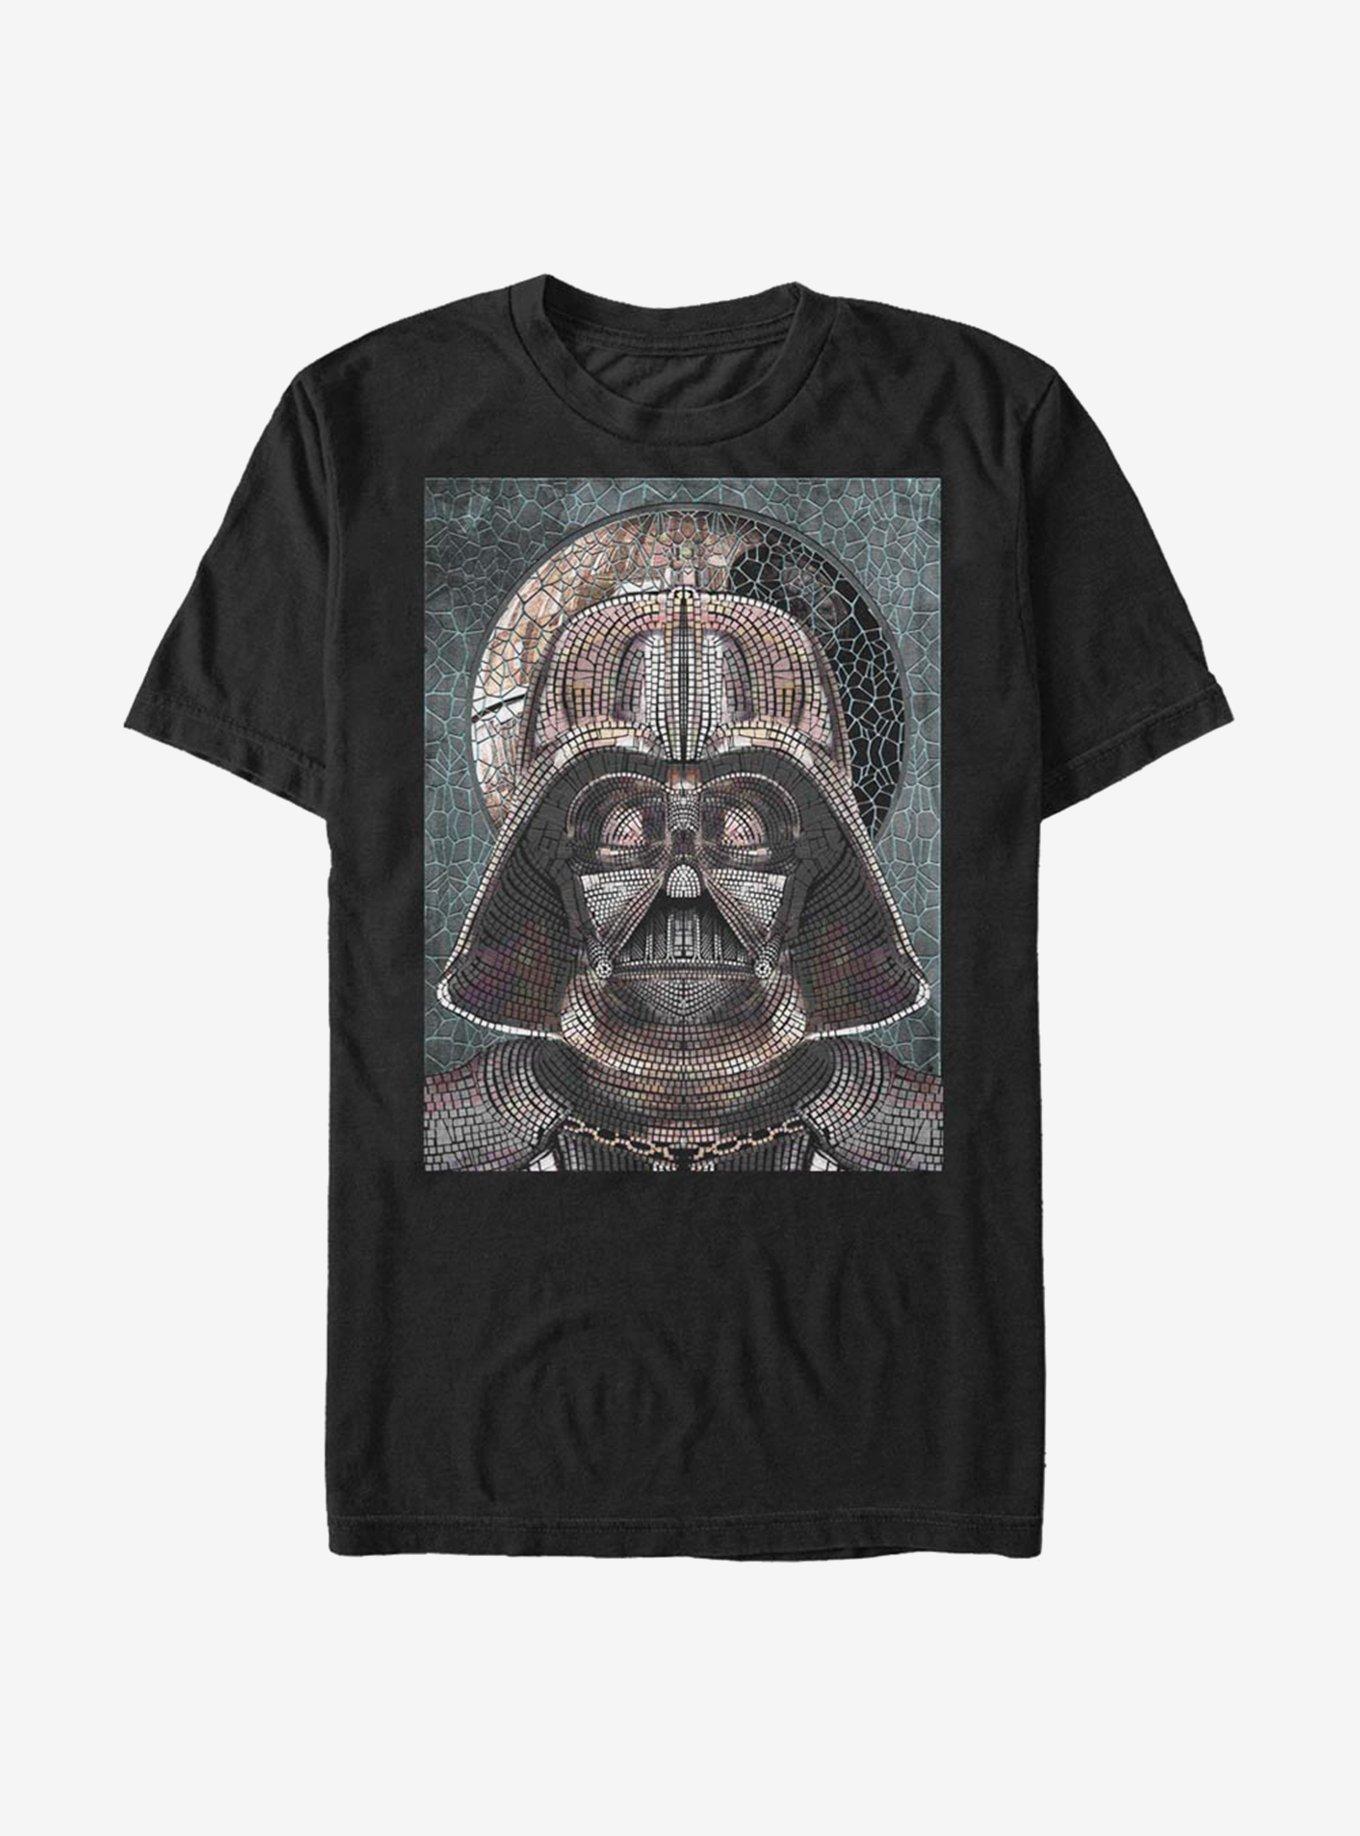 Star Wars Sith Lord T-Shirt | Hot Topic